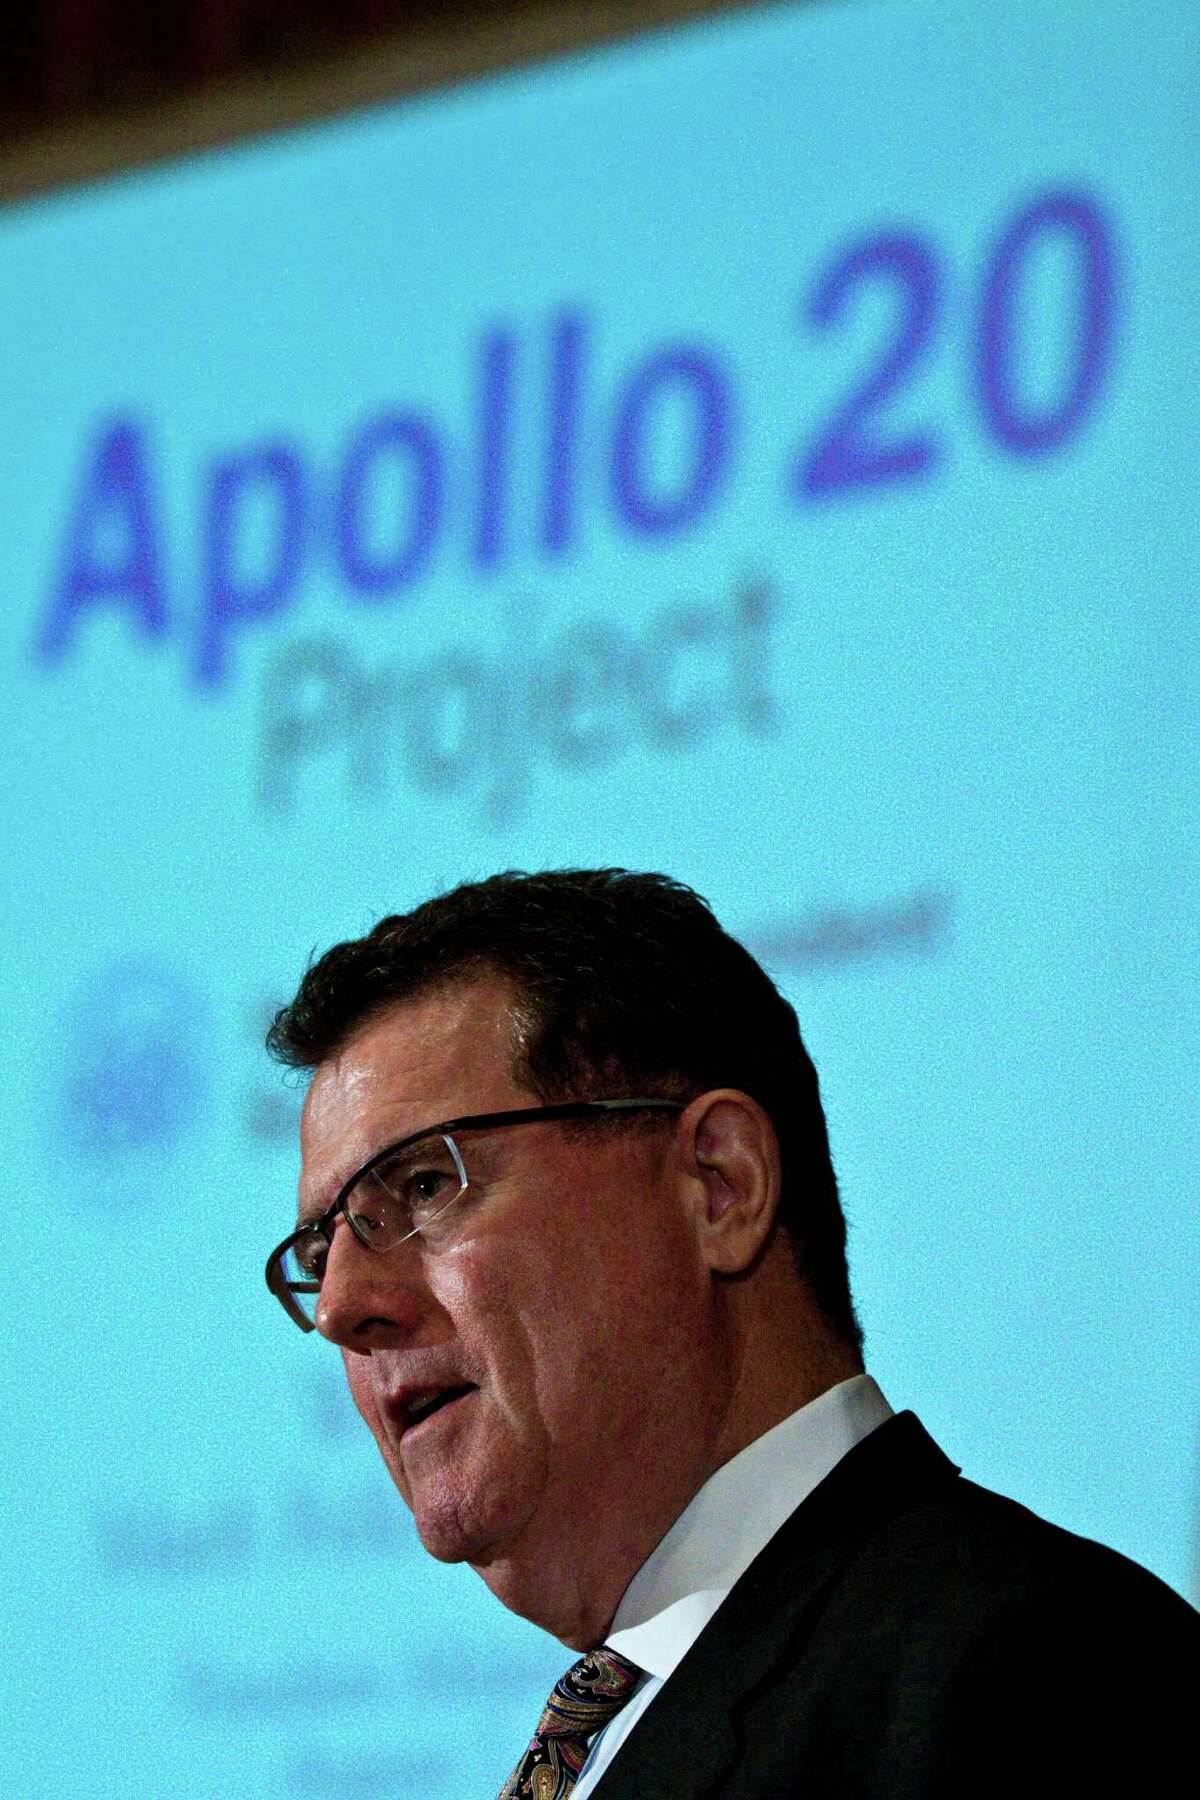 Last year, the school board narrowly approved a tax hike to fund operational expenses apart from the bond issue, including raises for teachers and funding for Superintendent Terry Grier's signature school reform program called Apollo. (File/Eric Kayne/For the Chronicle)